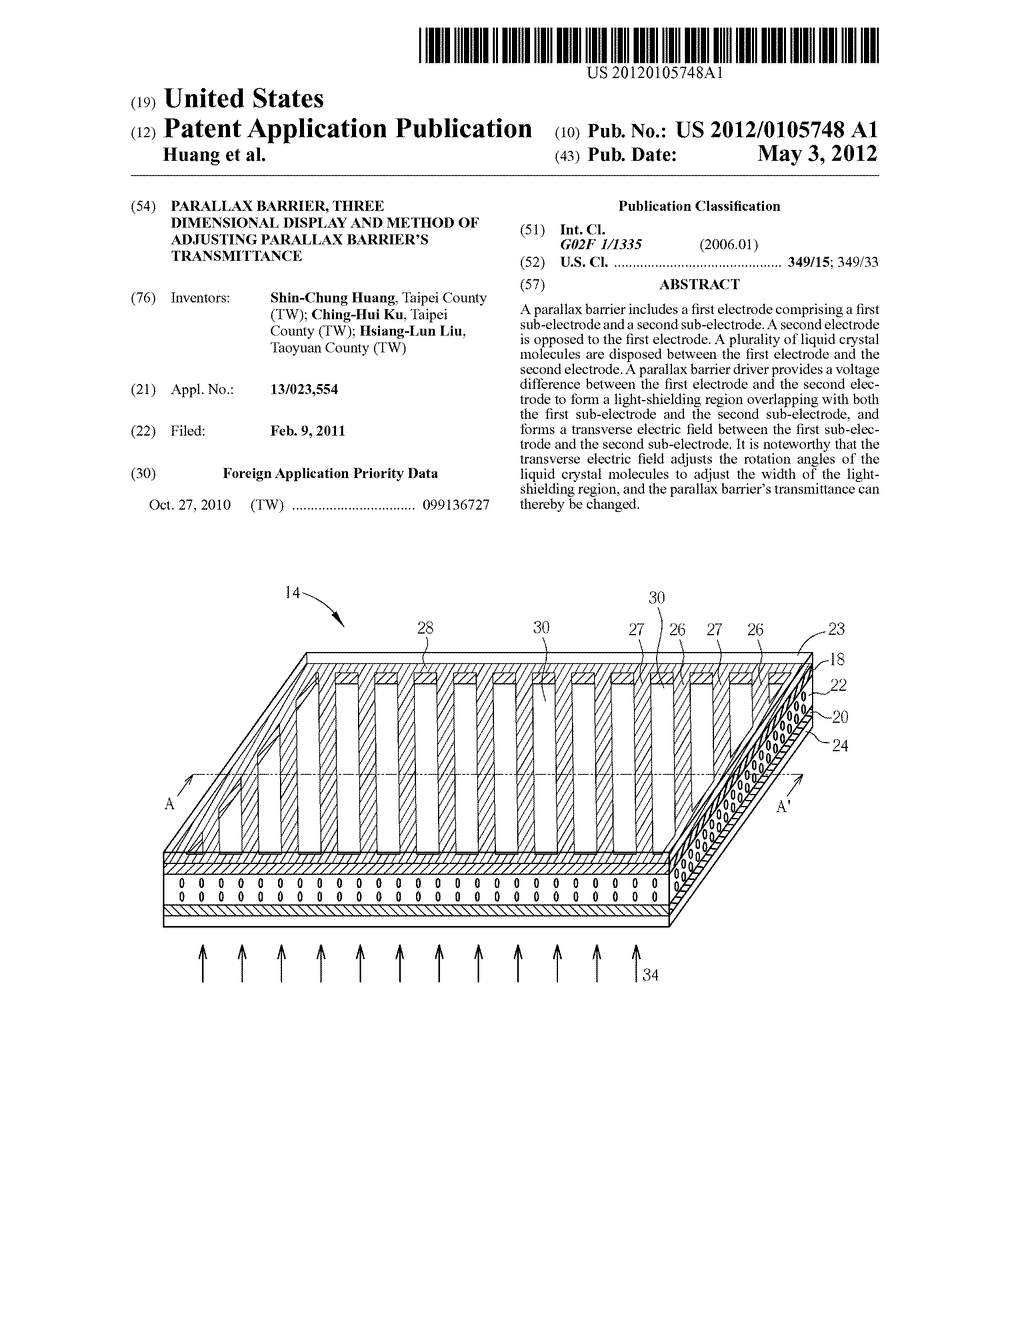 PARALLAX BARRIER, THREE DIMENSIONAL DISPLAY AND METHOD OF ADJUSTING     PARALLAX BARRIER'S TRANSMITTANCE - diagram, schematic, and image 01